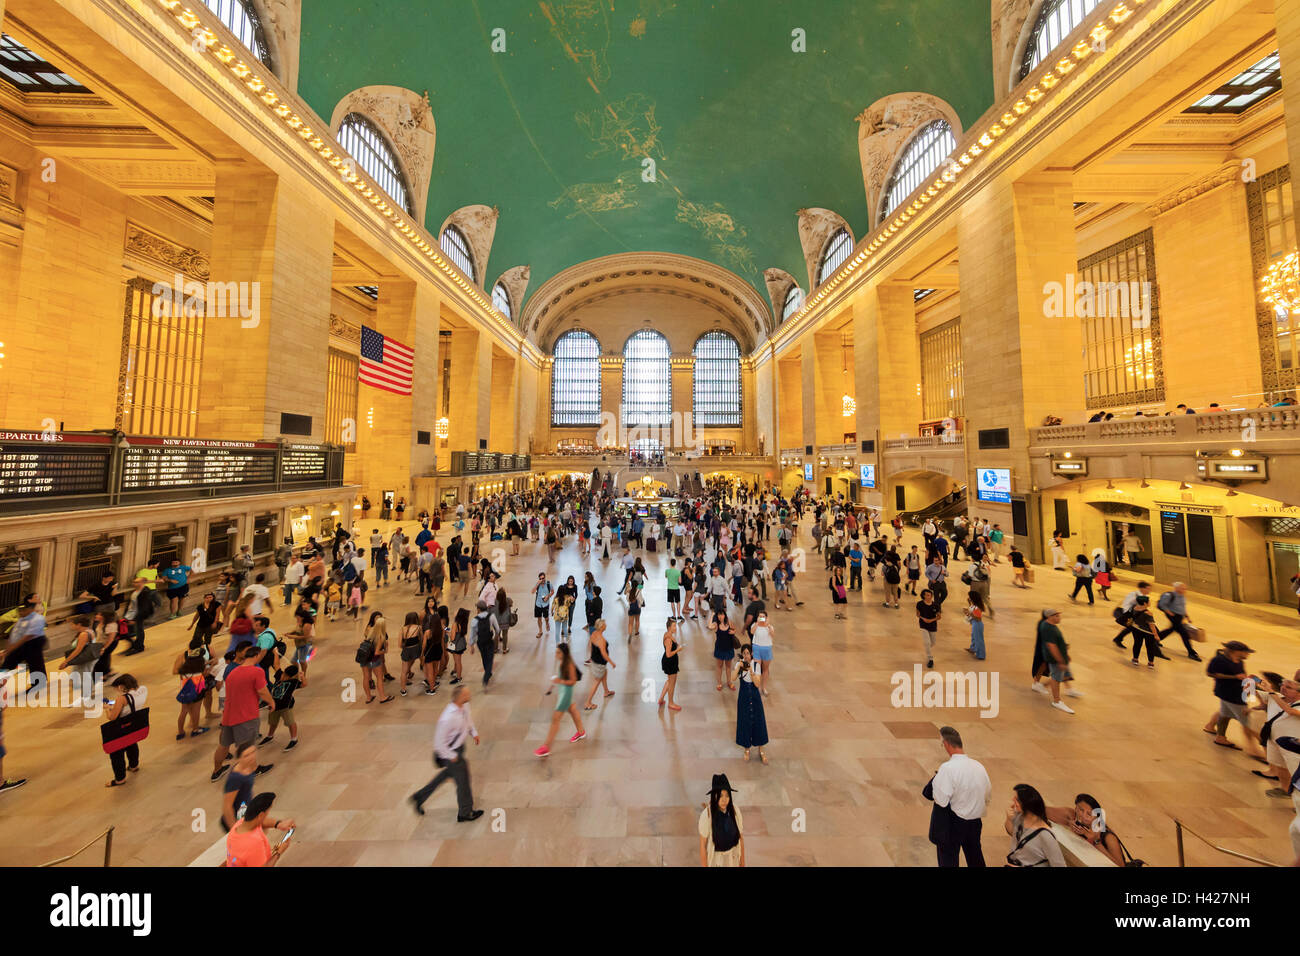 An interior view of Grand Central Station in New York City with all the travelers. Stock Photo